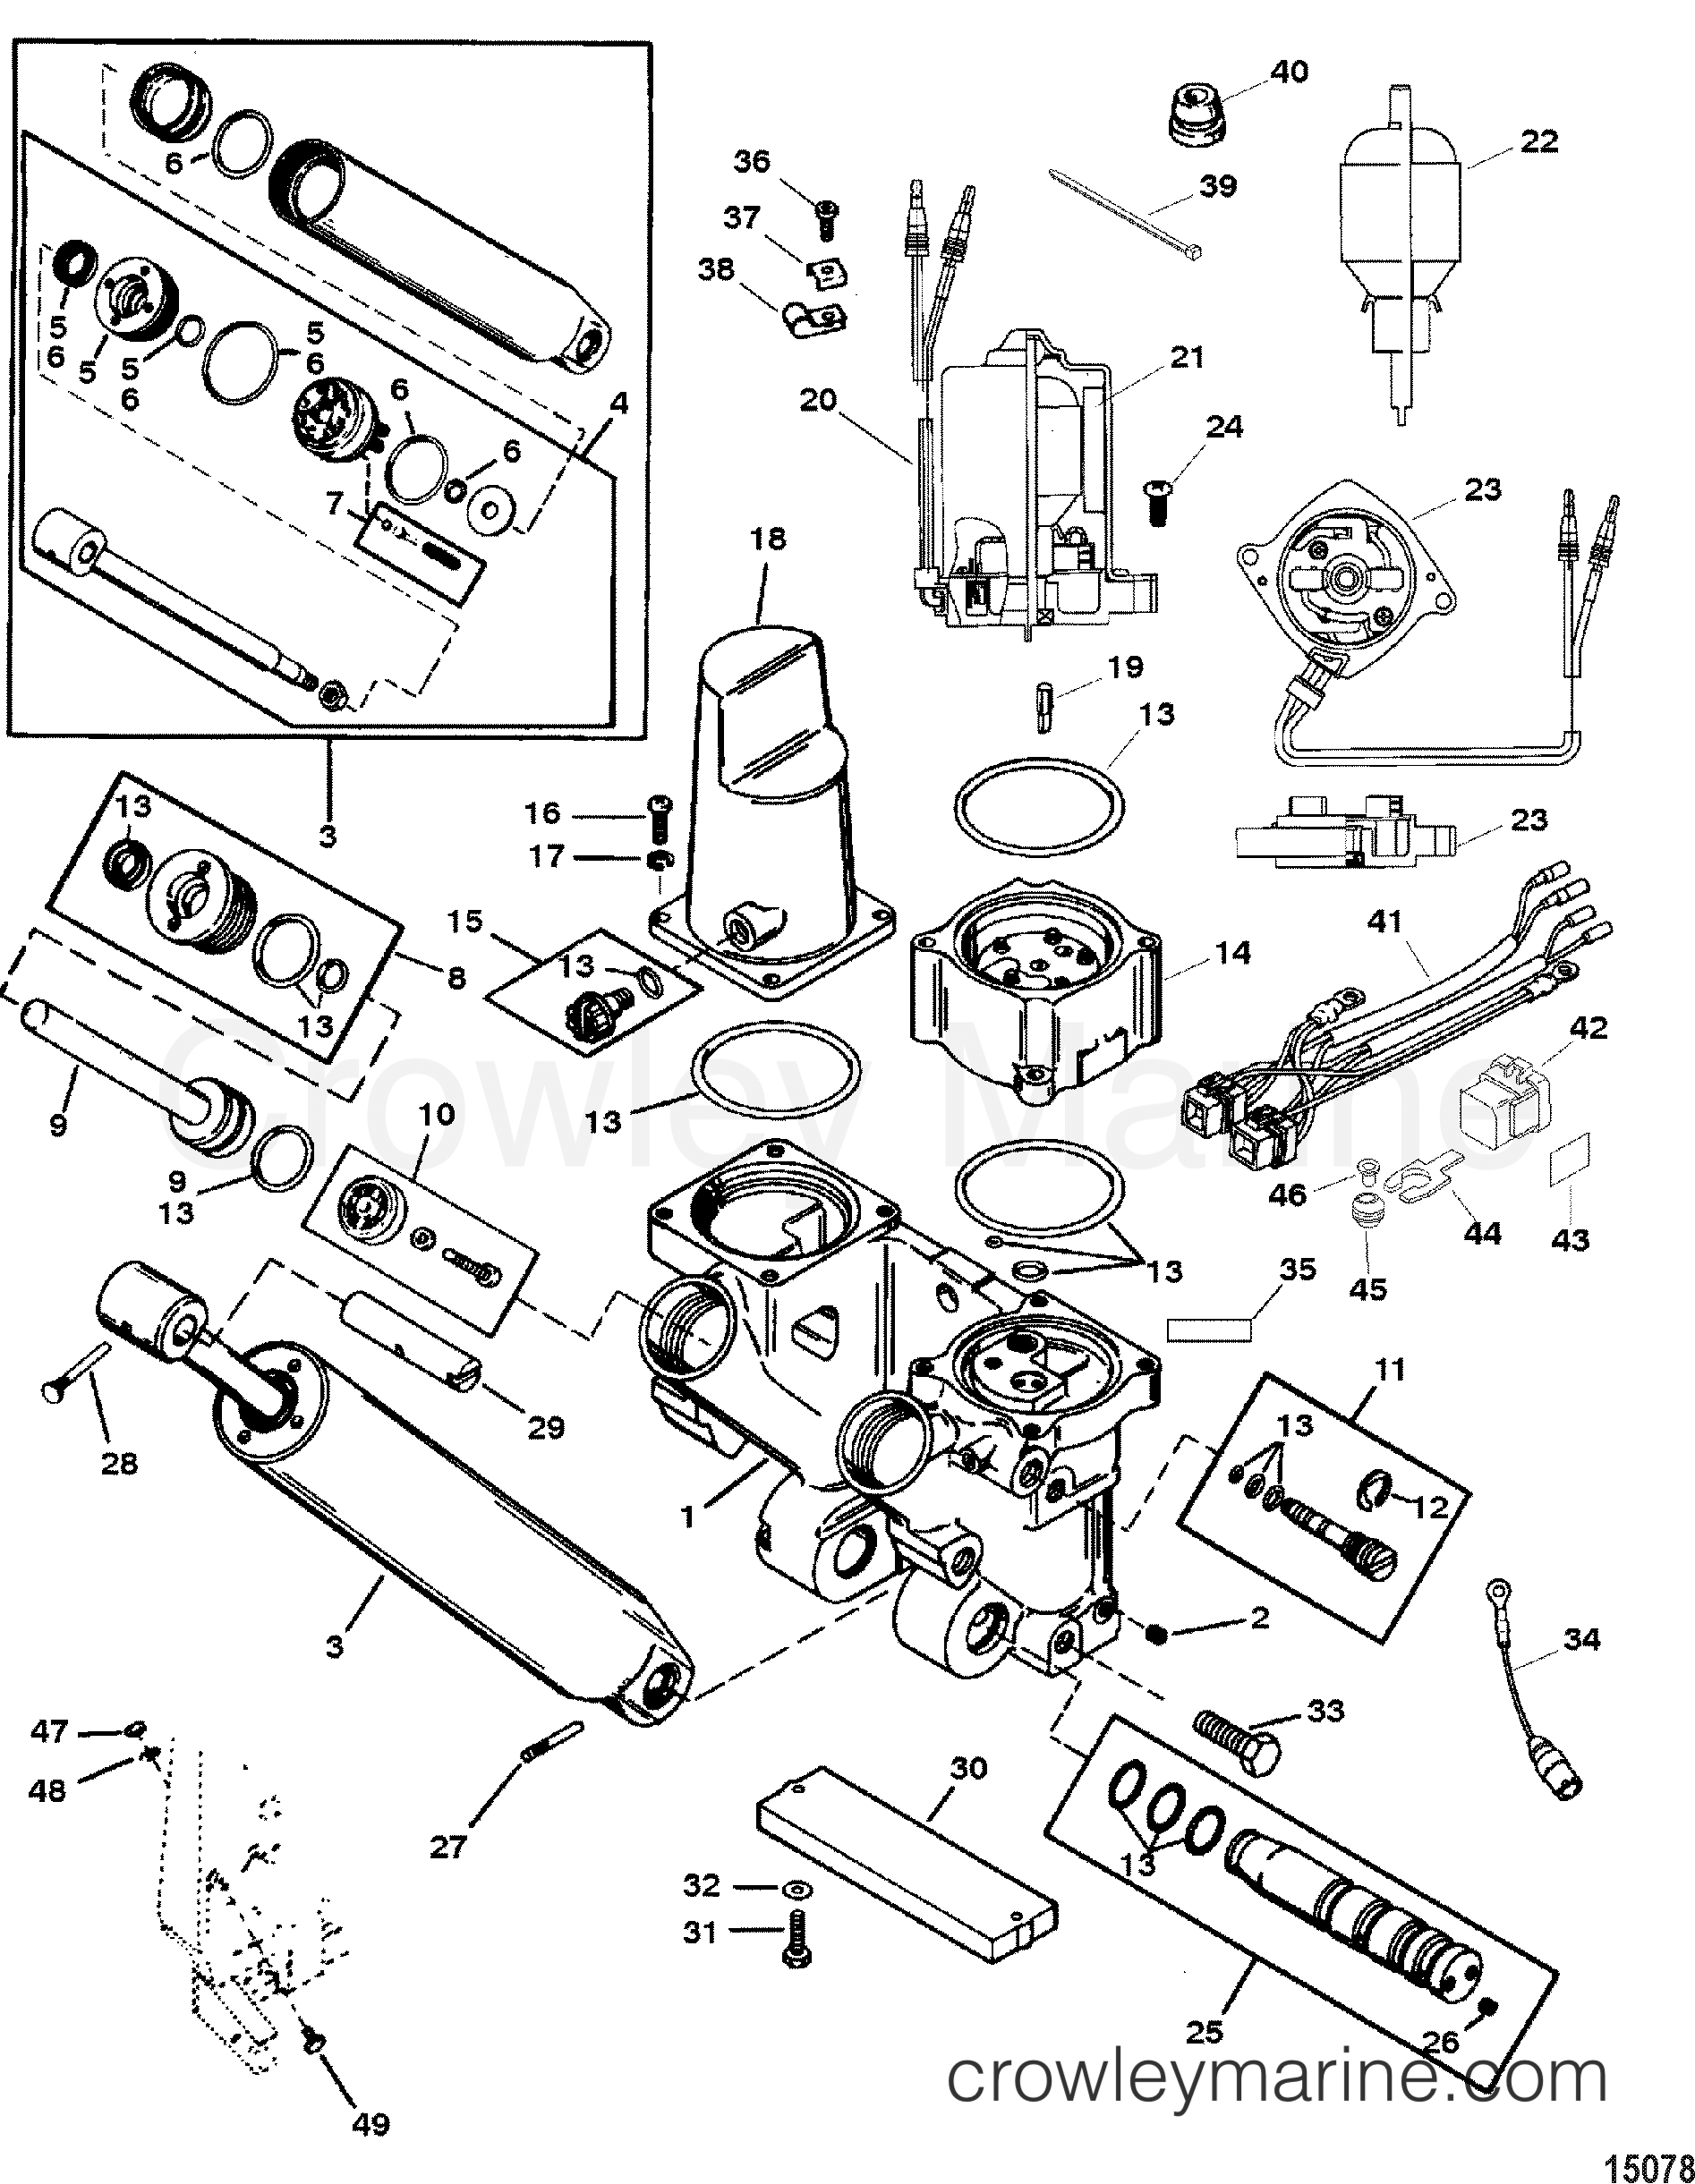 Power Trim And Tilt Kit(826729A4) - Various Years Rigging Parts Trim - Mercury Outboard Power Trim Wiring Diagram